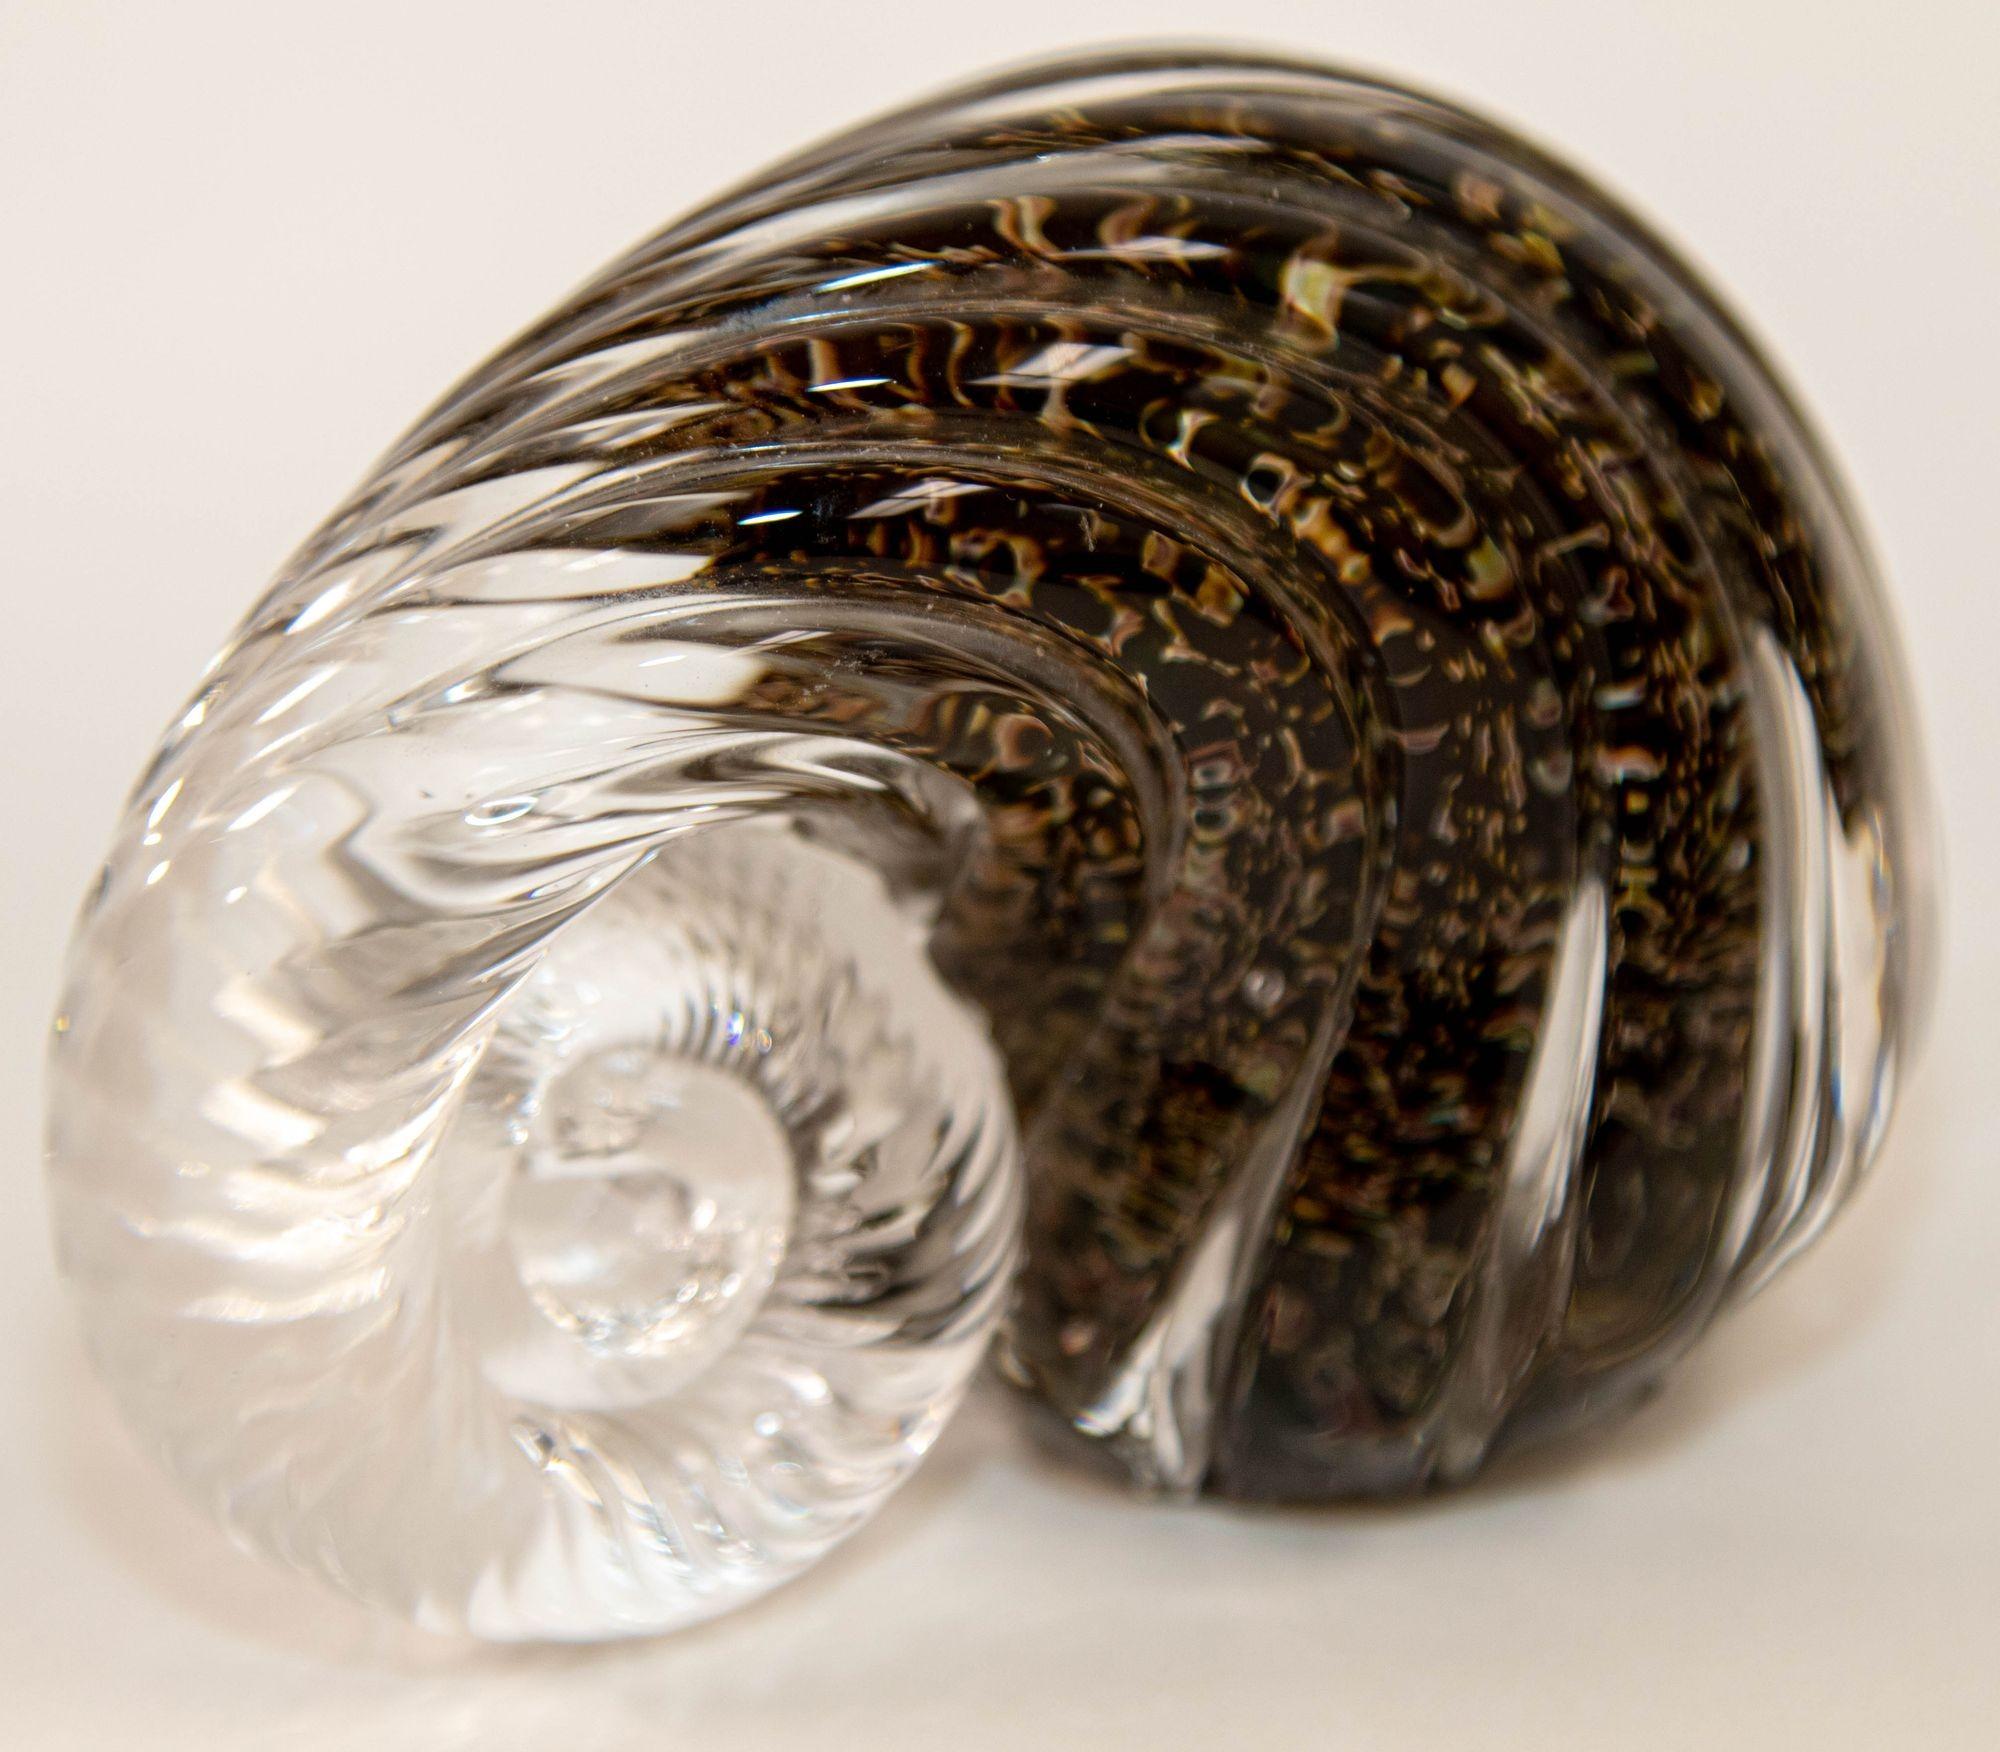 Chambered Nautilus Shell Art Glass Paperweight For Sale 1